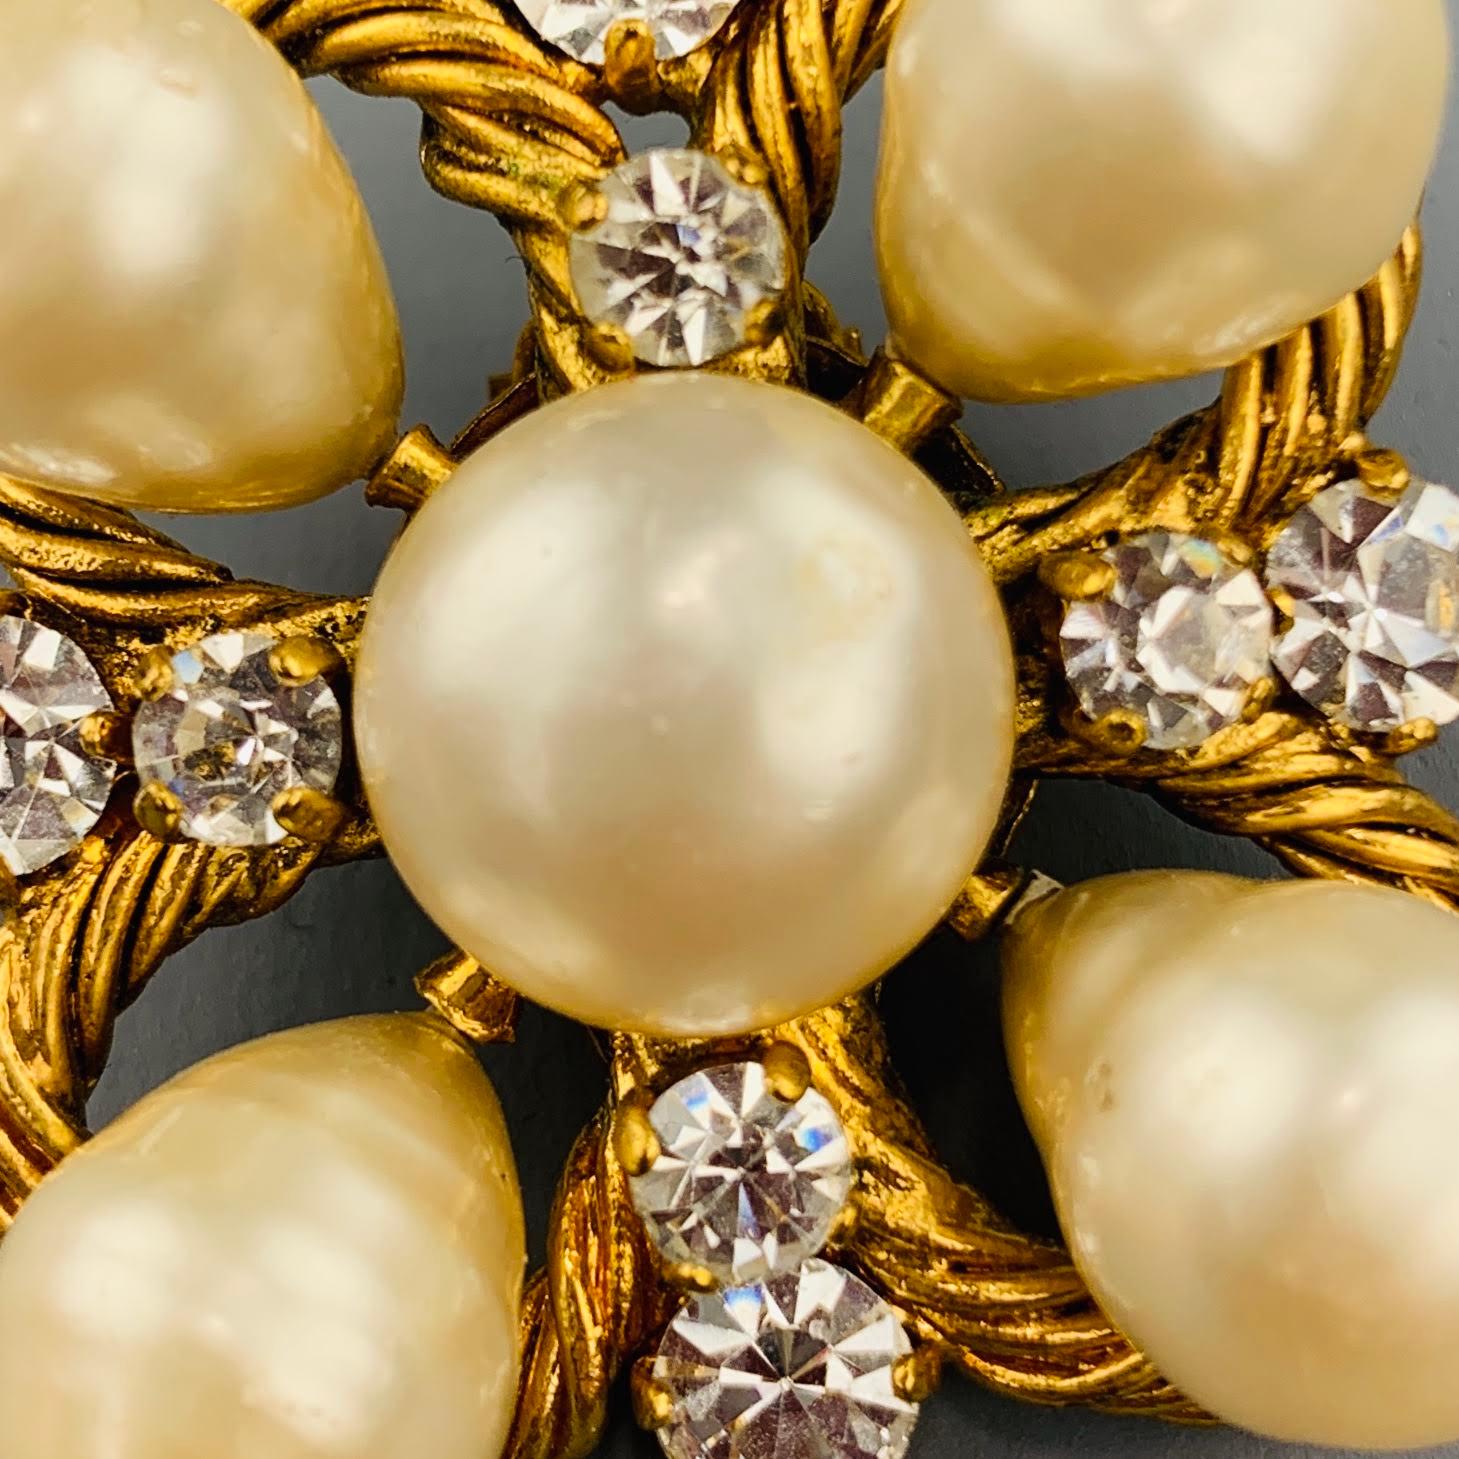 Vintage CHANEL Season 29 (Circa 1986-1992) clip on earrings come in yellow gold tone twist textured metal in a cluster formation with clear rhinestones and round and teardrop faux pearls. Made in France.
 
Very Good Pre-Owned Condition.
Marked: 29
